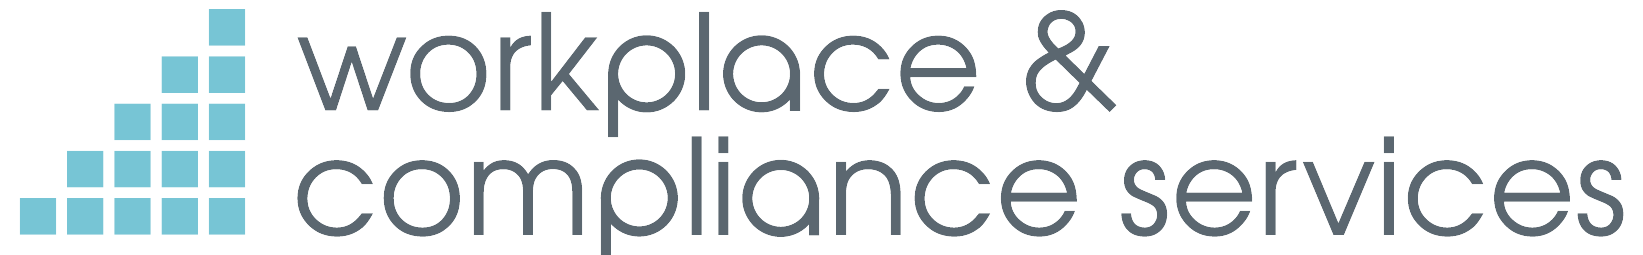 Bellrock workplace & compliance service logo and name